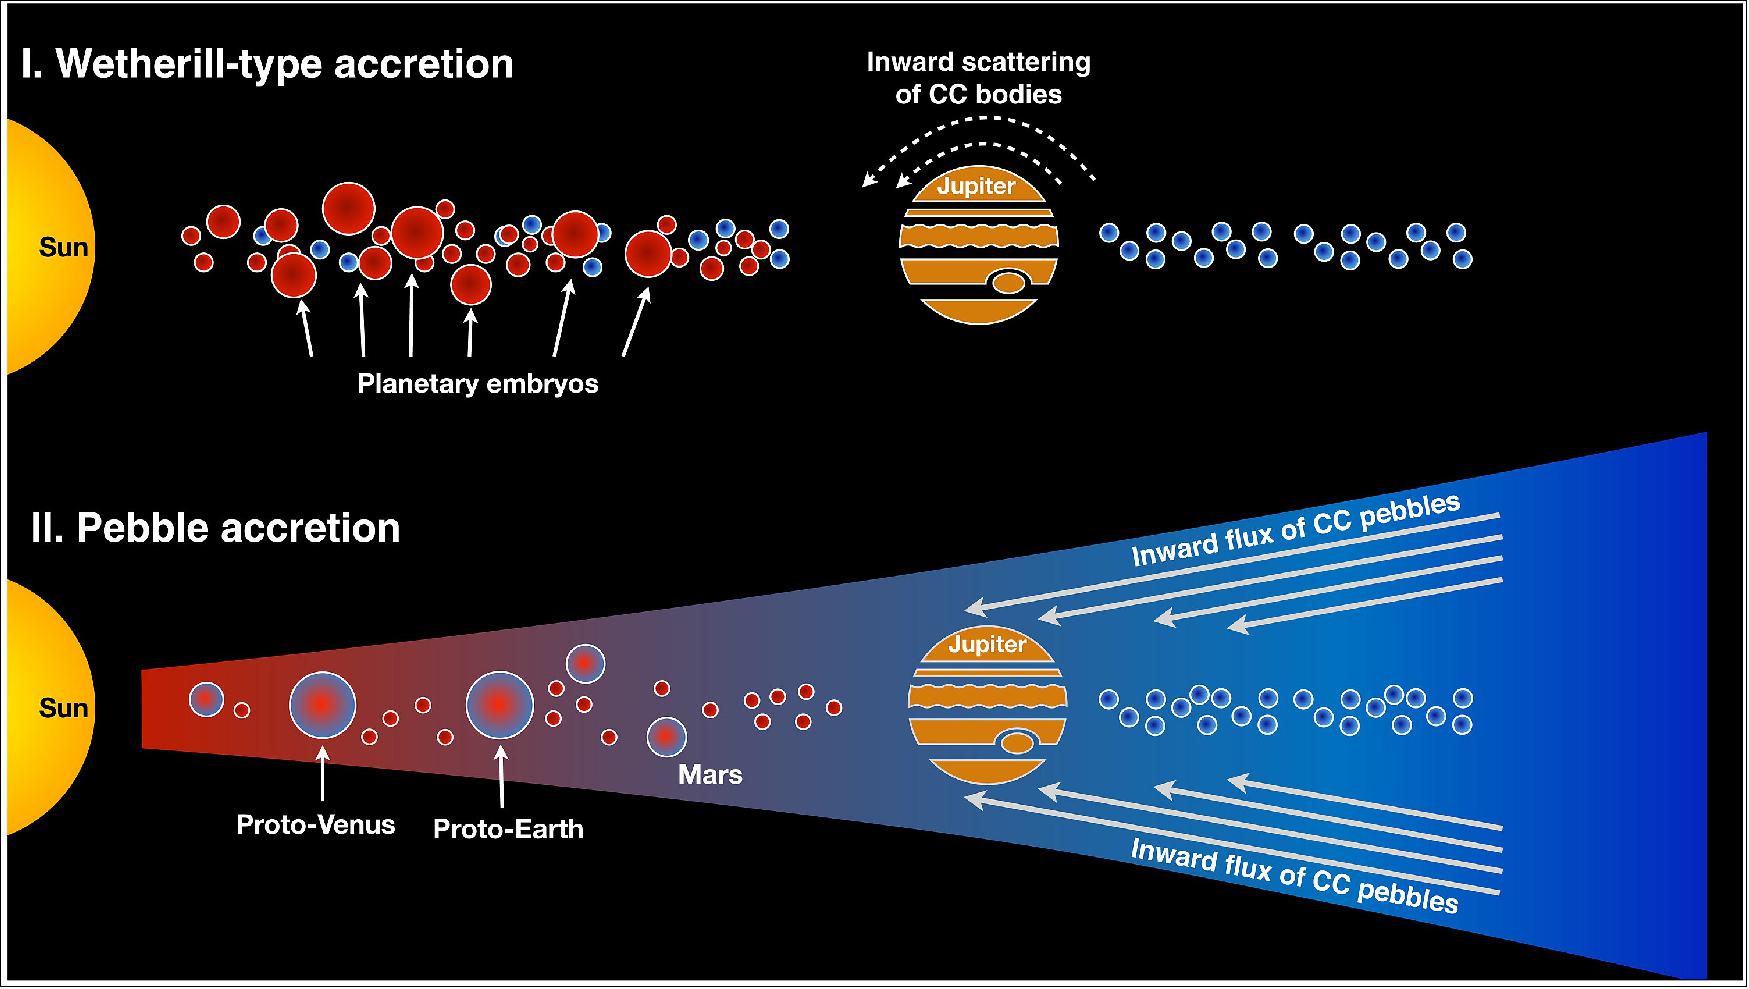 Figure 2: Possible scenarios of terrestrial planet formation. In the classic "Wetherill-type" model of oligarchic growth, the terrestrial planets formed by mutual collisions among Moon- to Mars-sized planetary embryos after the gas disk dissipated and accreted only a small fraction of CC planetesimals, which were scattered inward during Jupiter's growth and/or putative migration. Alternatively, the terrestrial planets may have formed within the lifetime of the gas disk by efficiently accreting "pebbles" from the outer solar system, which drift sunward through the disk due to gas drag. The two models differ in the amount of outer solar system (CC) material accreted by the terrestrial planets, which may be quantified using nucleosynthetic isotope anomalies (image credit: LLNL)